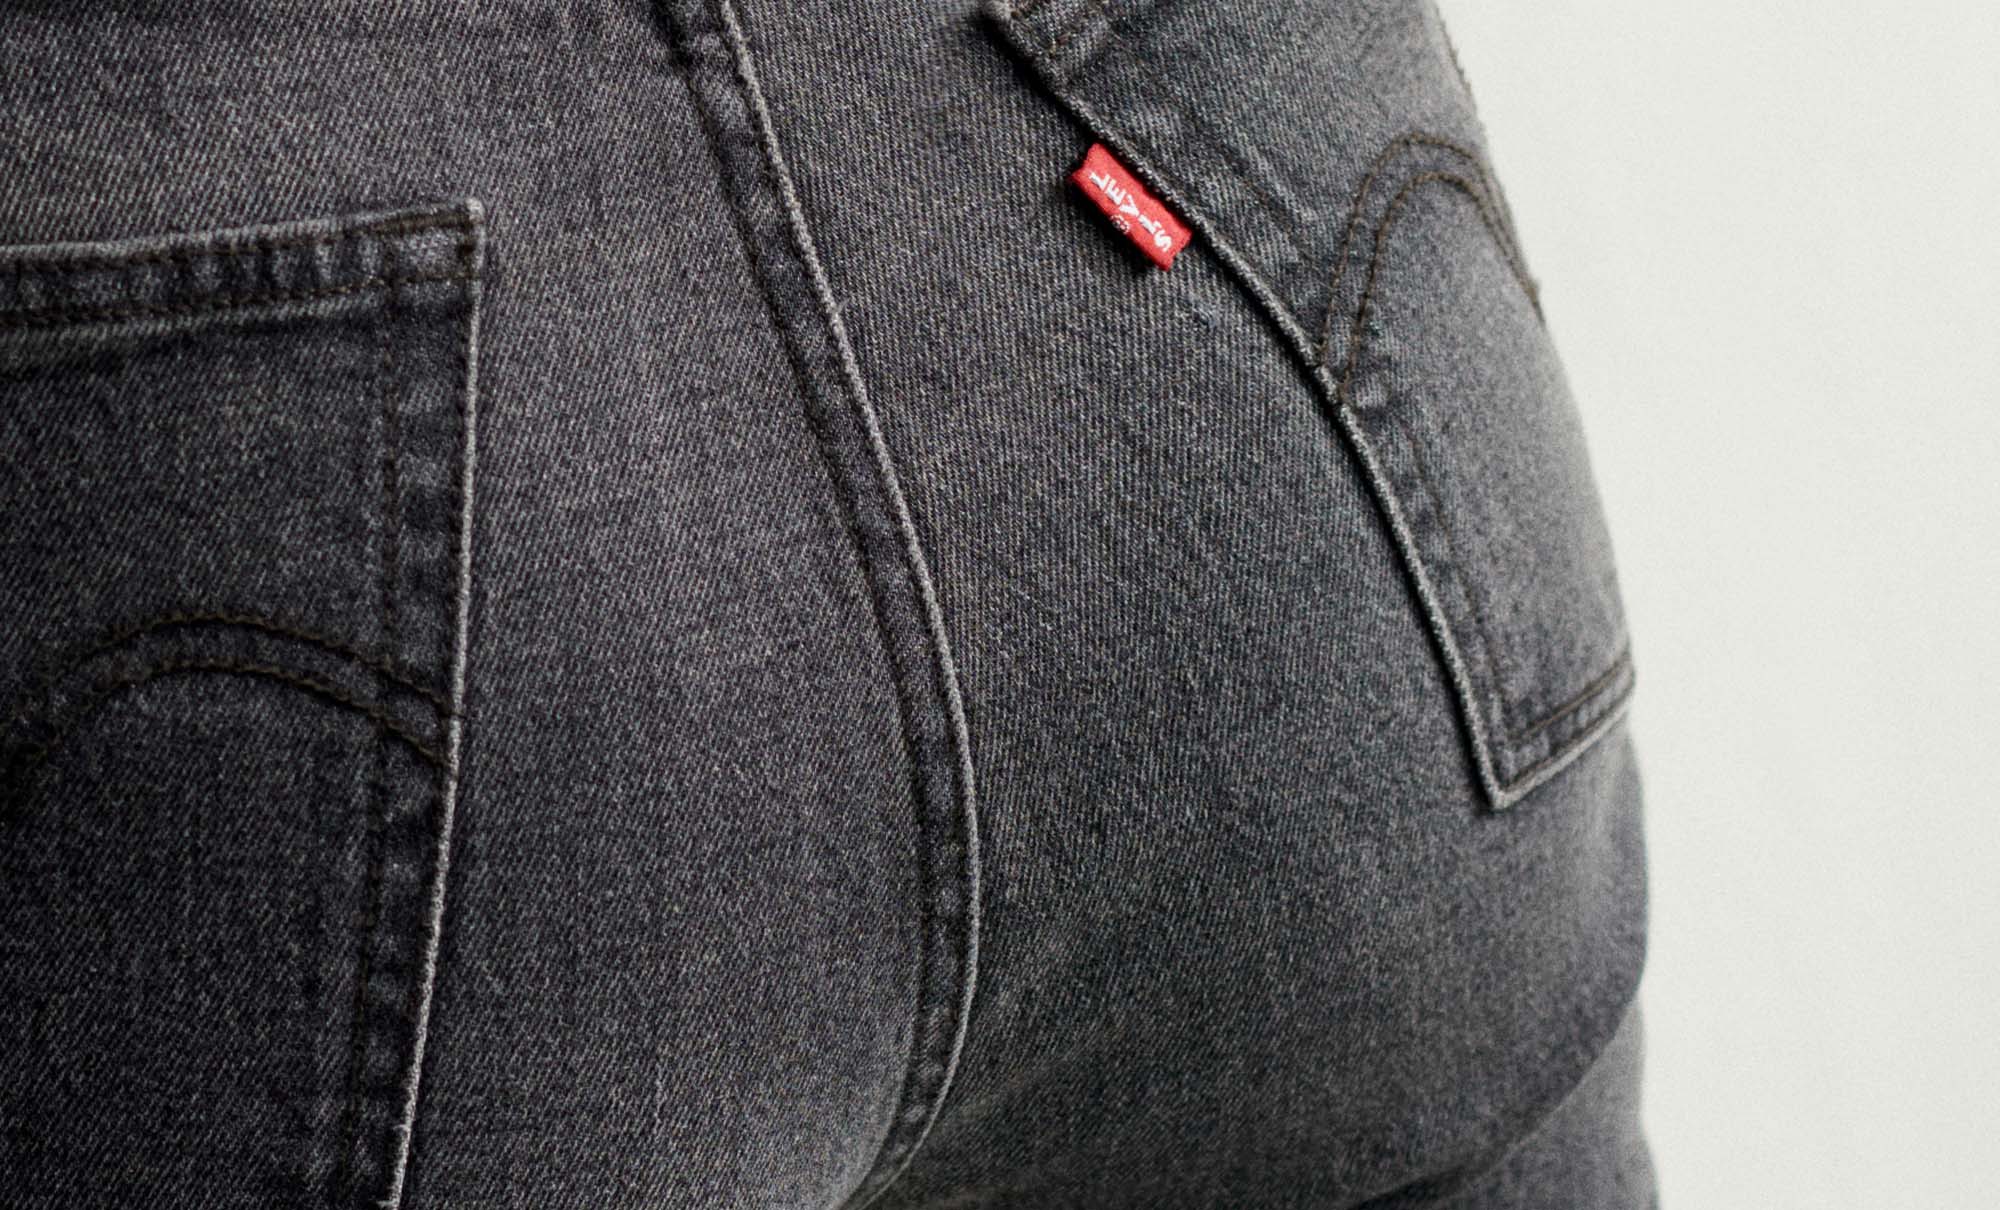 The True Story Behind the Debut of Black Jeans - Levi Strauss & Co